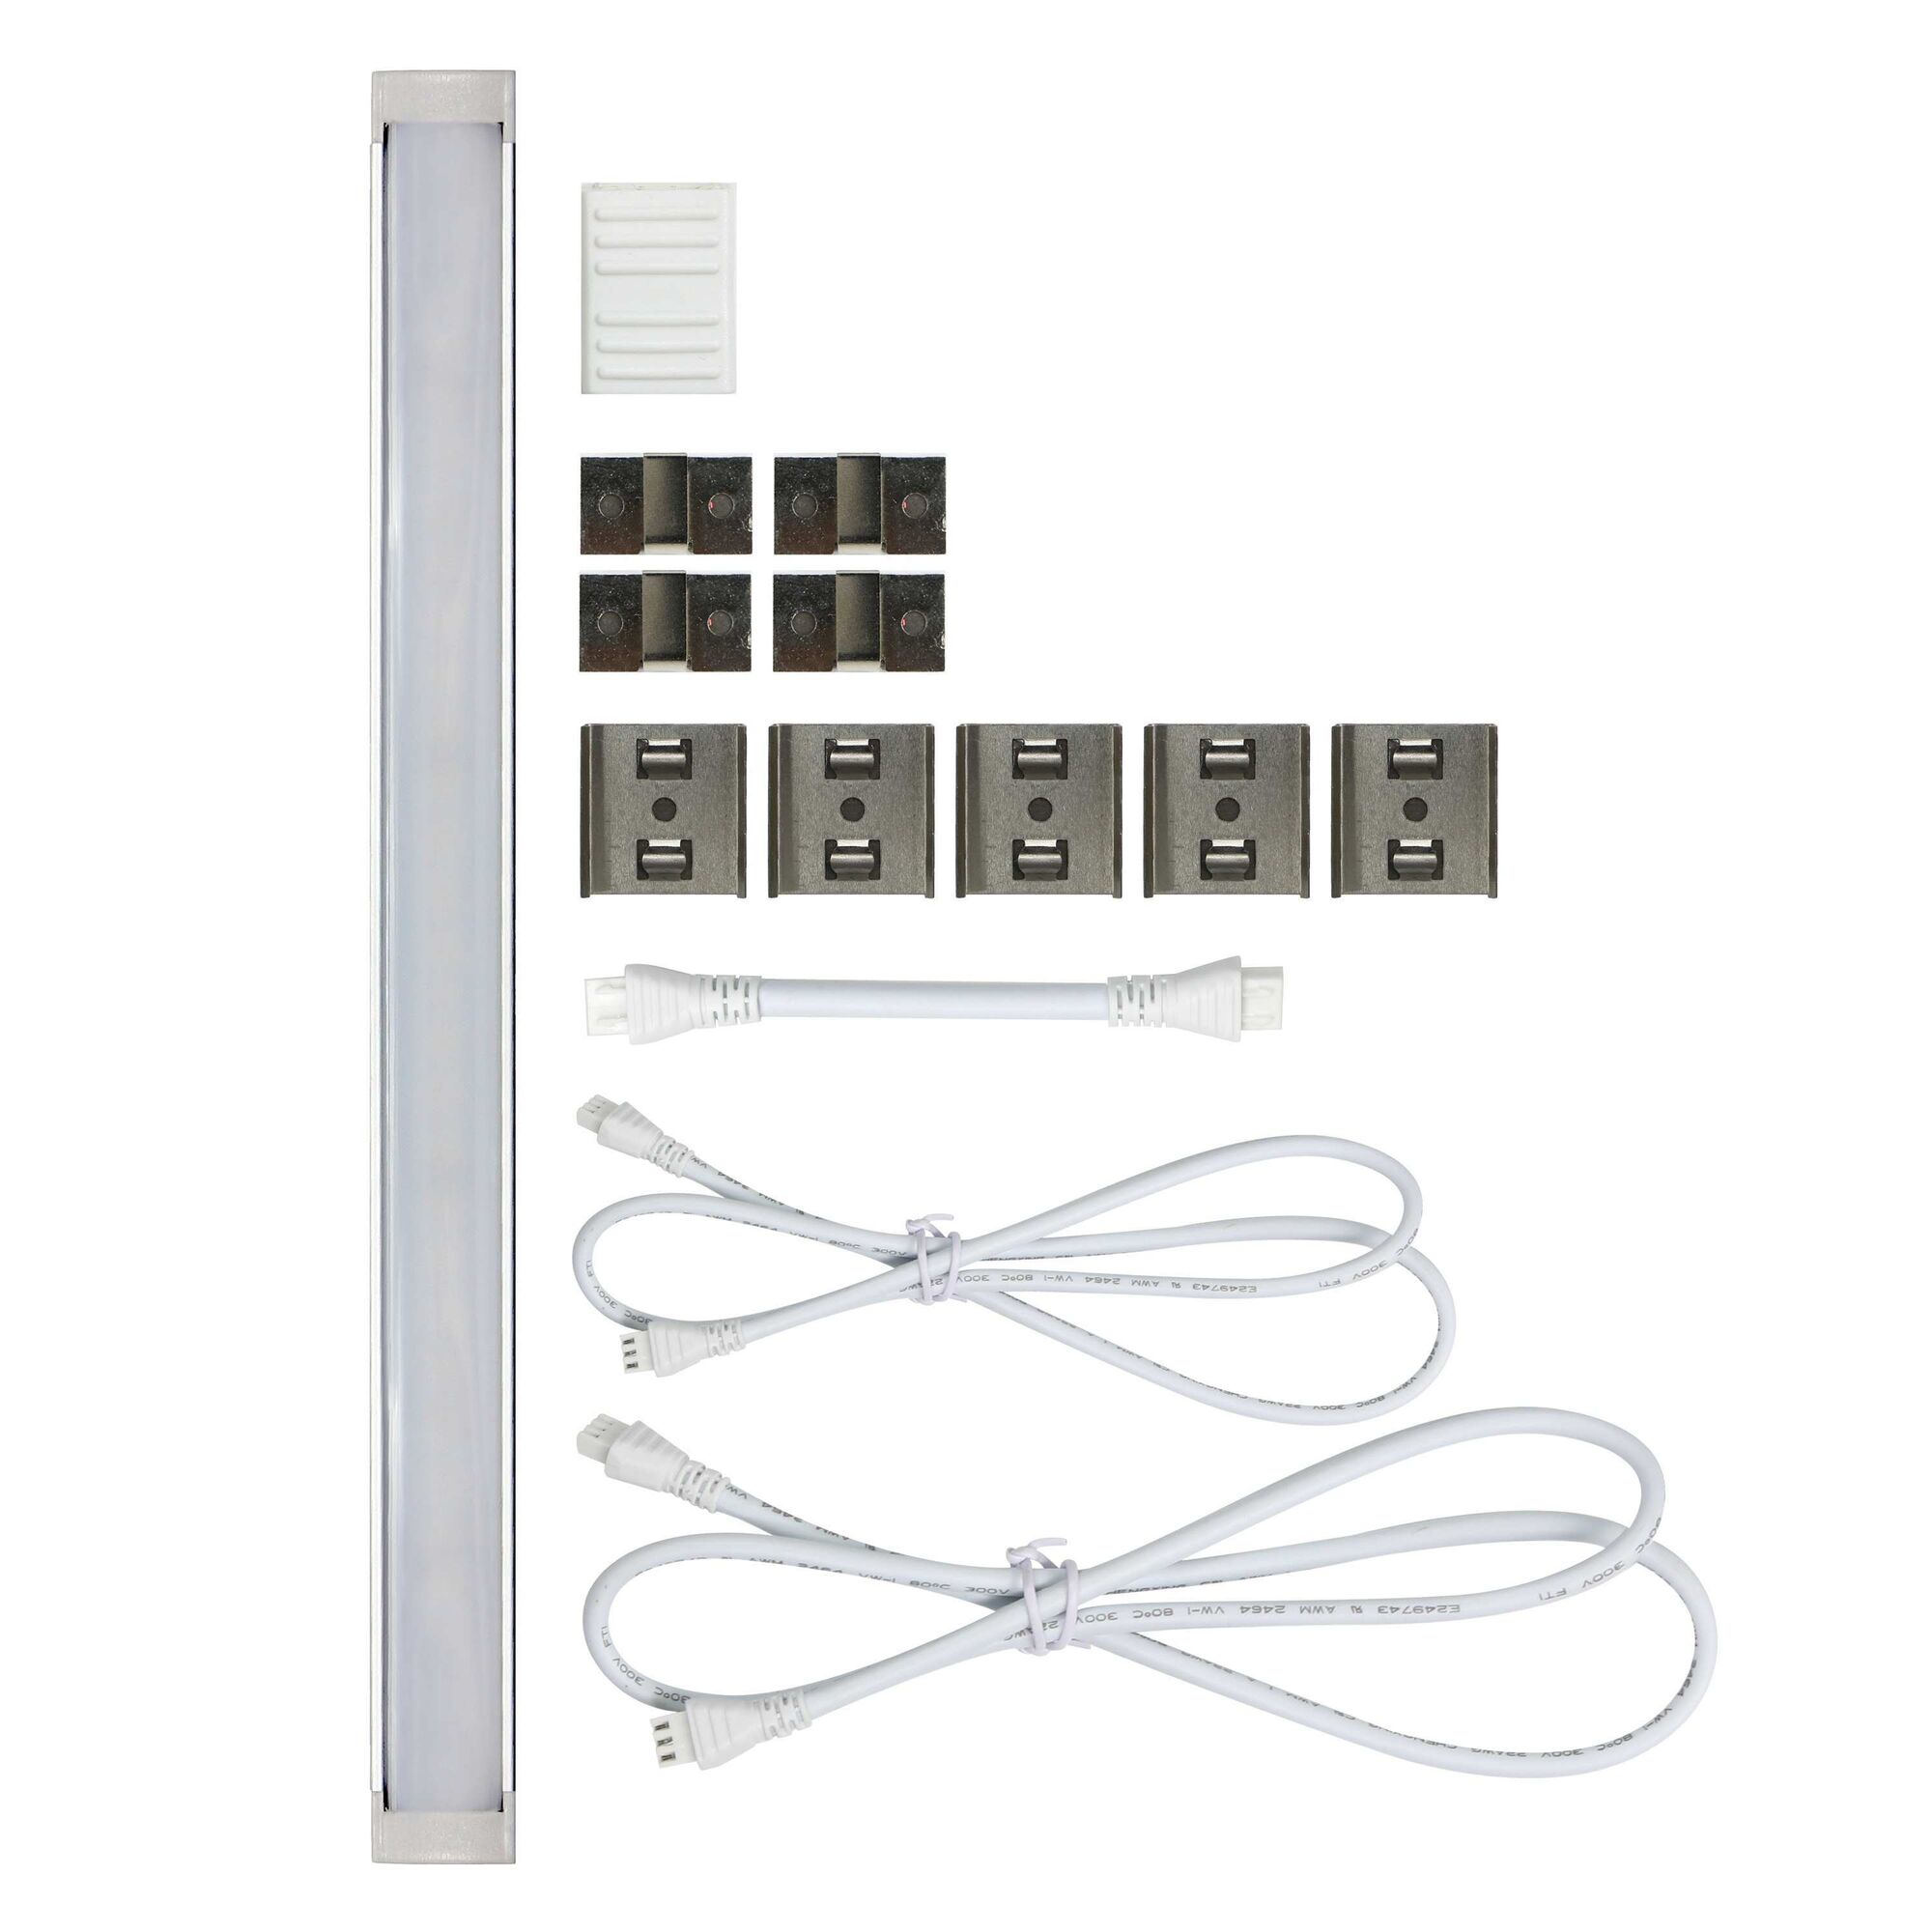 9 inch 1 bar under cabinet accessory light with complete kit.